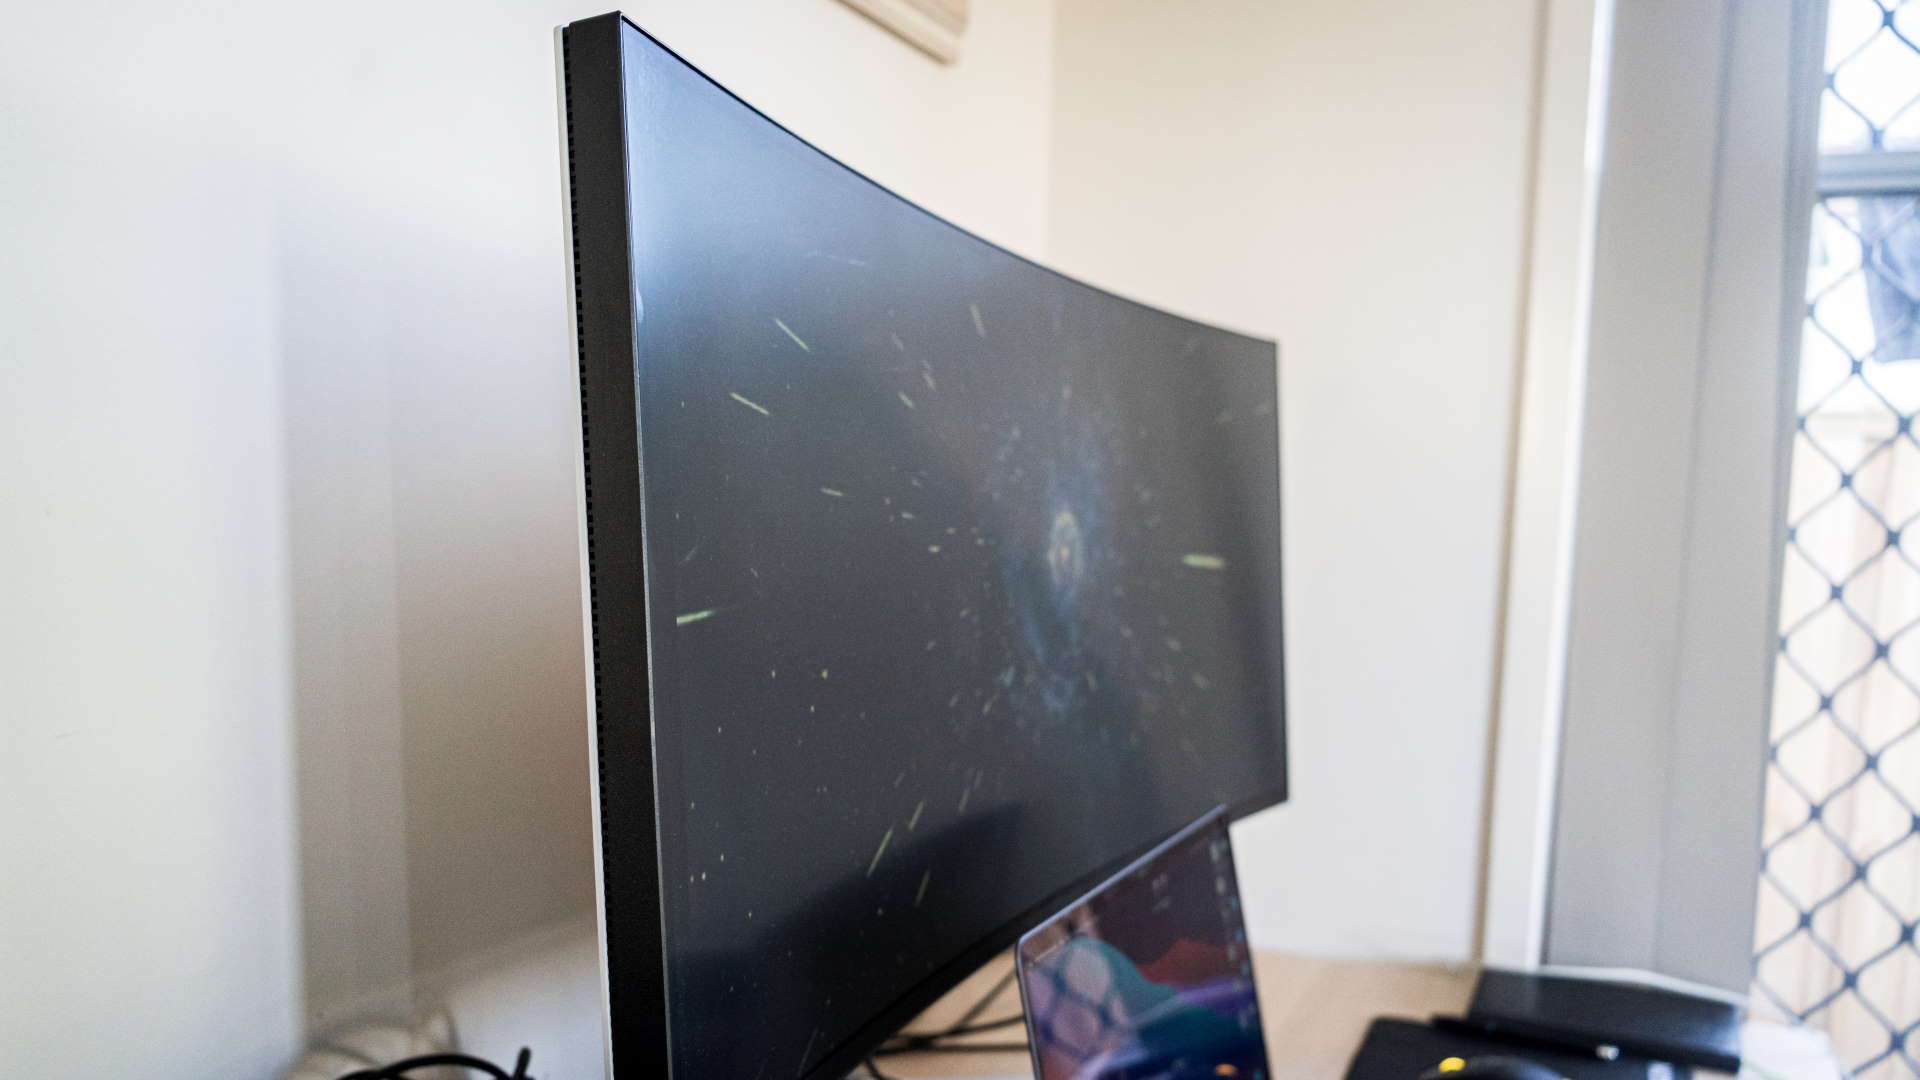 Alienware AW3821DW gaming monitor